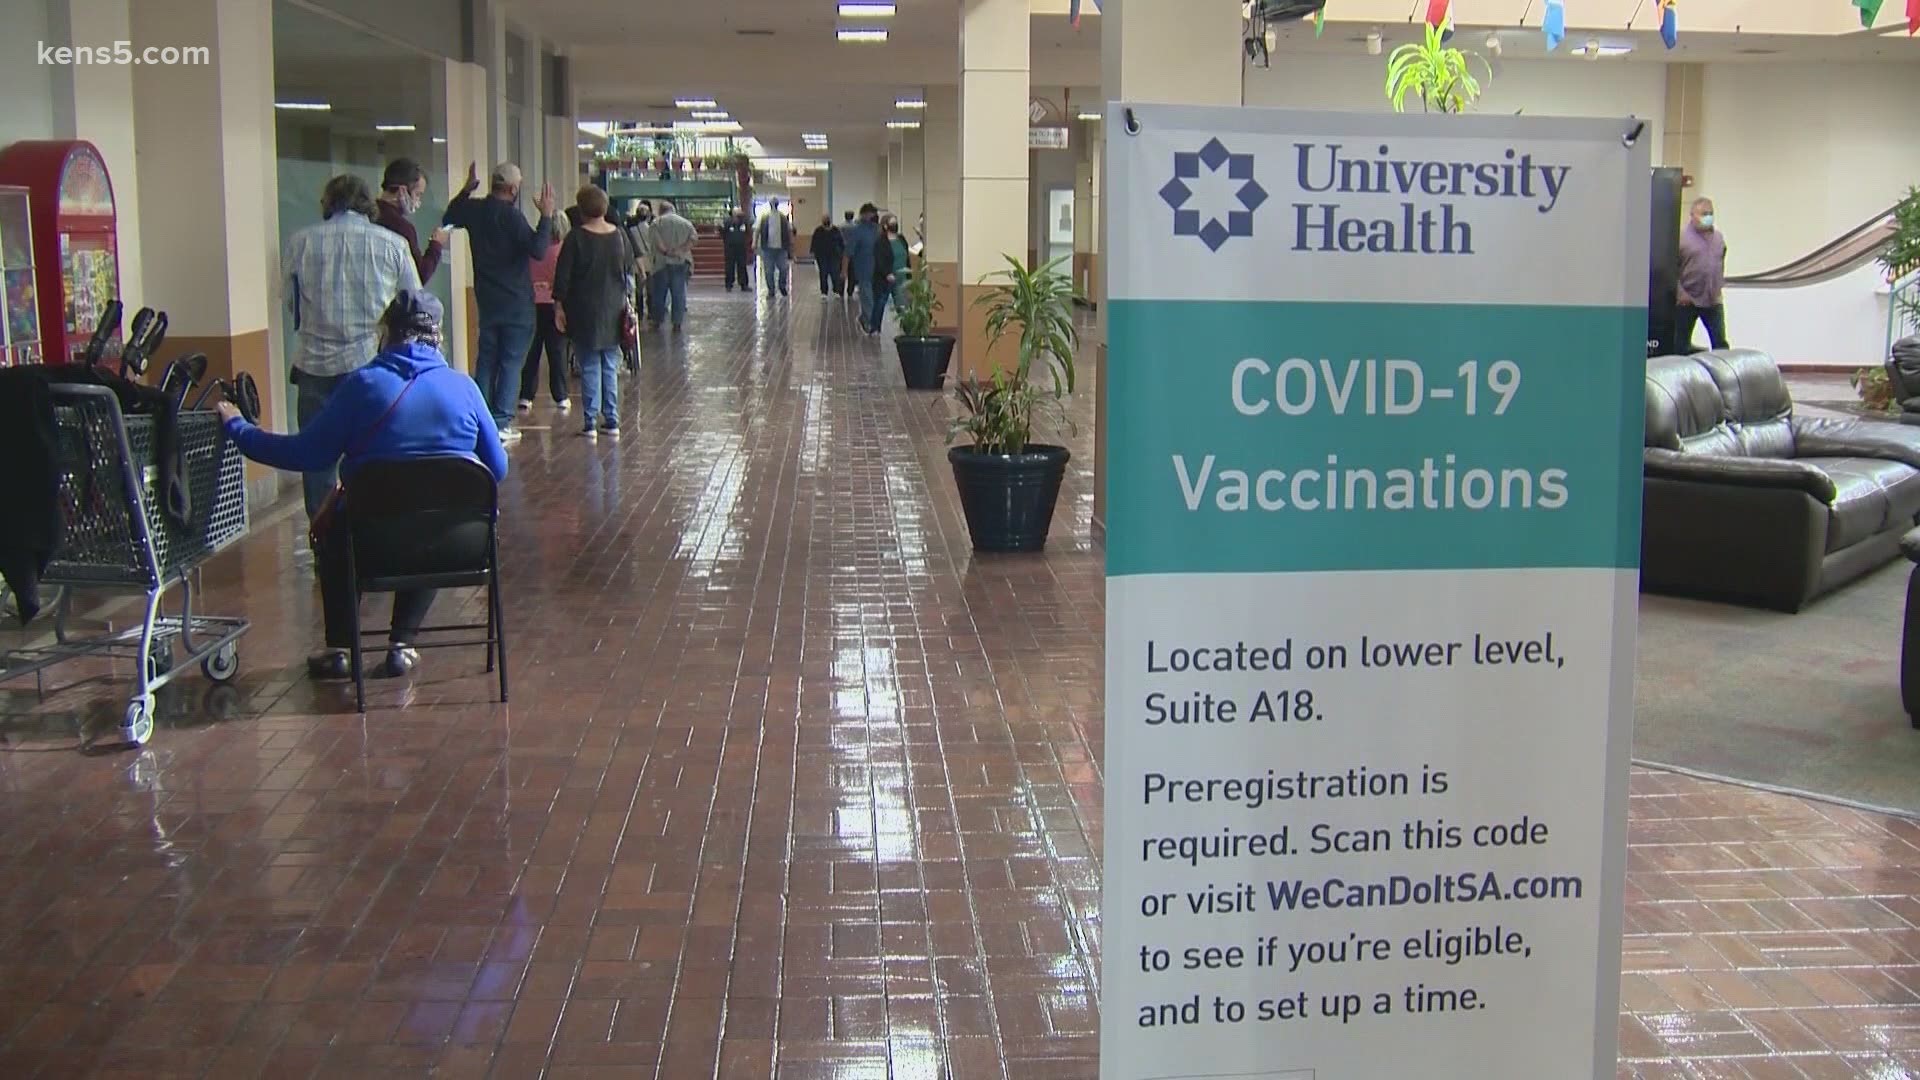 Several hundred San Antonians were vaccinated at day 1 of University Health's clinic, held at a mall on Monday.